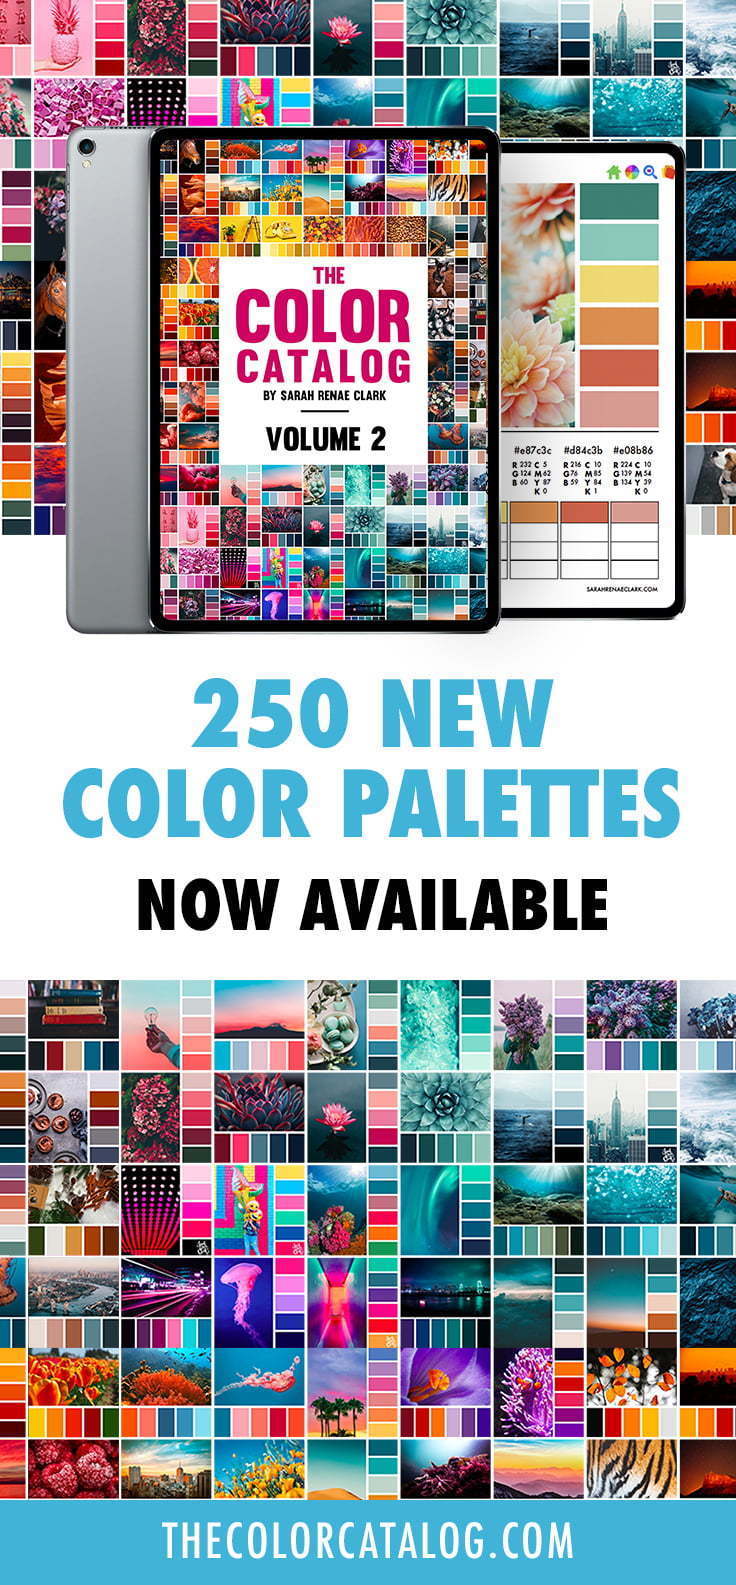 The Color Catalog